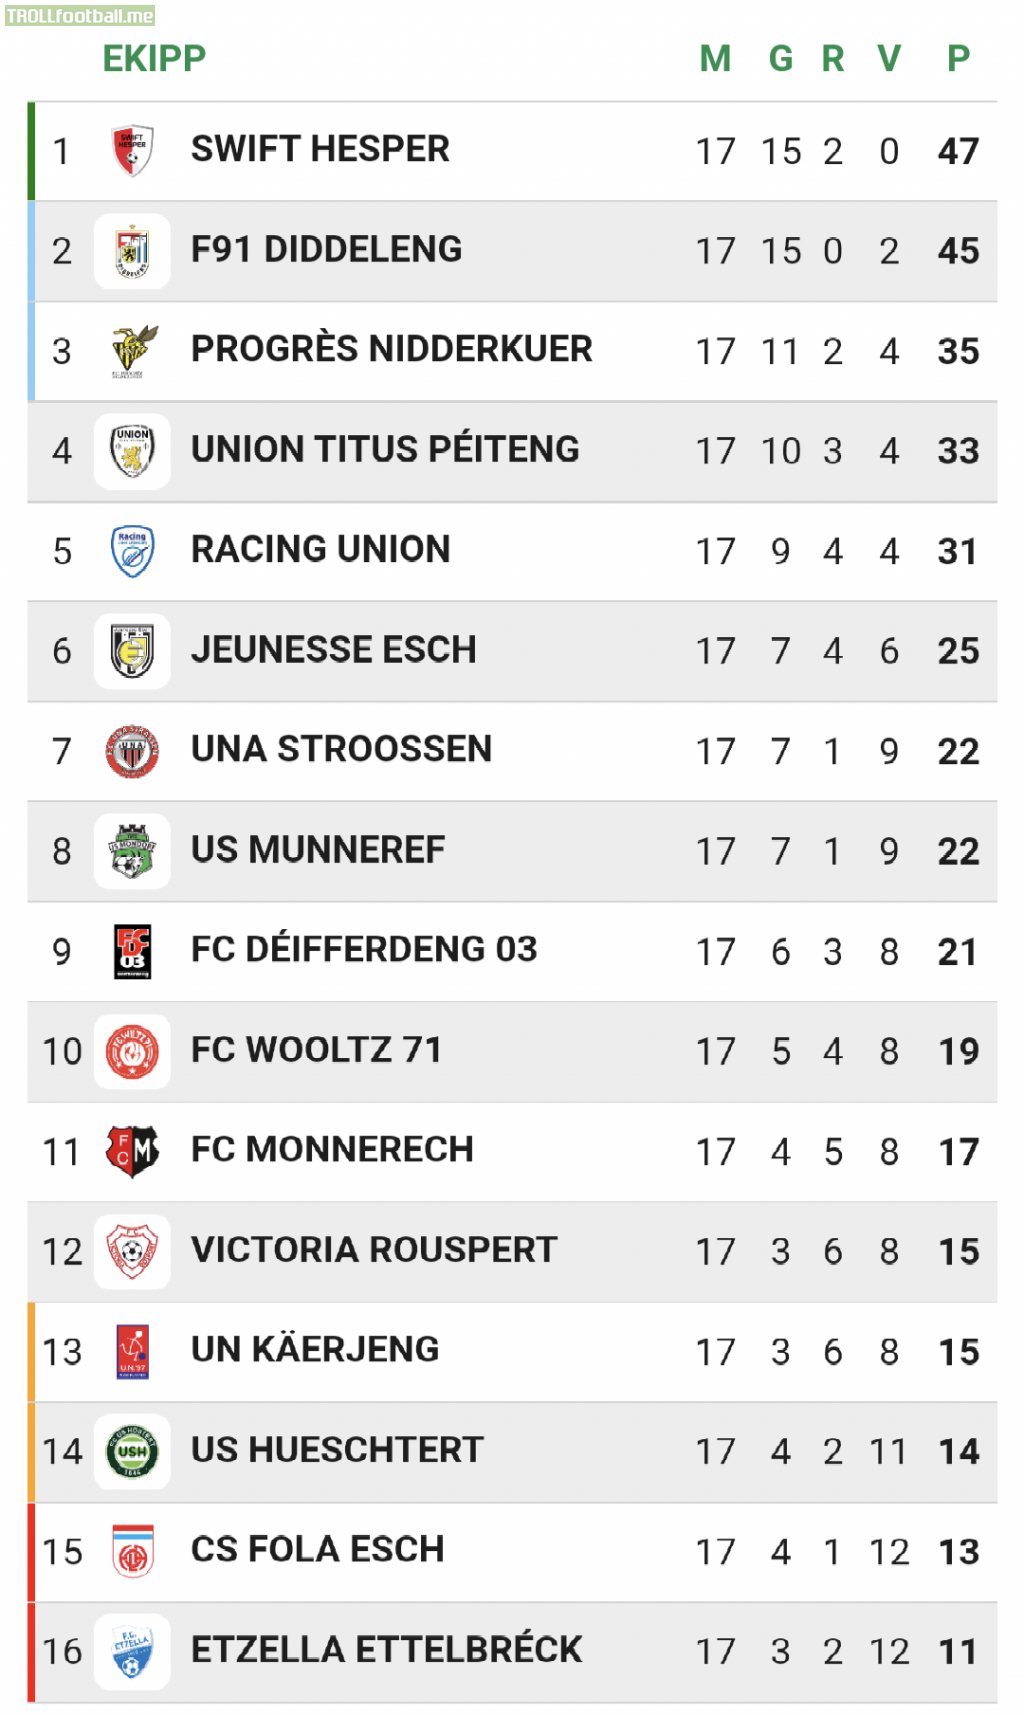 BGL League (Luxembourg) standing after Matchday 17. Hesper remains the only club undefeated this season.